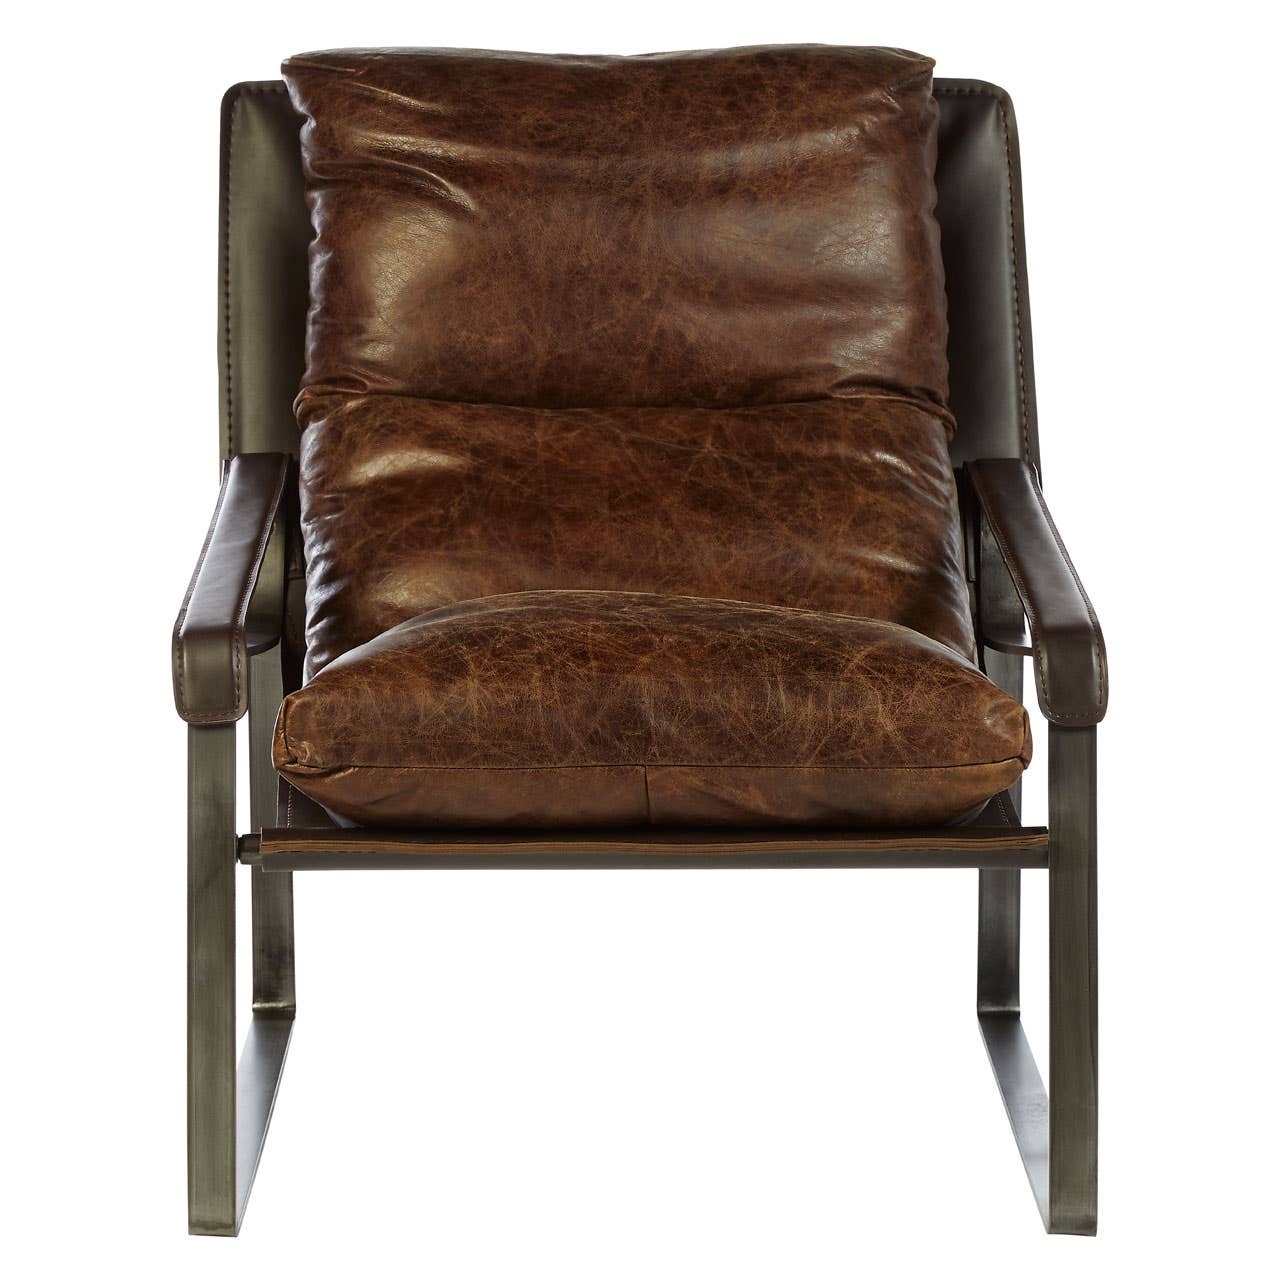 Hoxton Brown Leather Sledge Base Lounge Chair